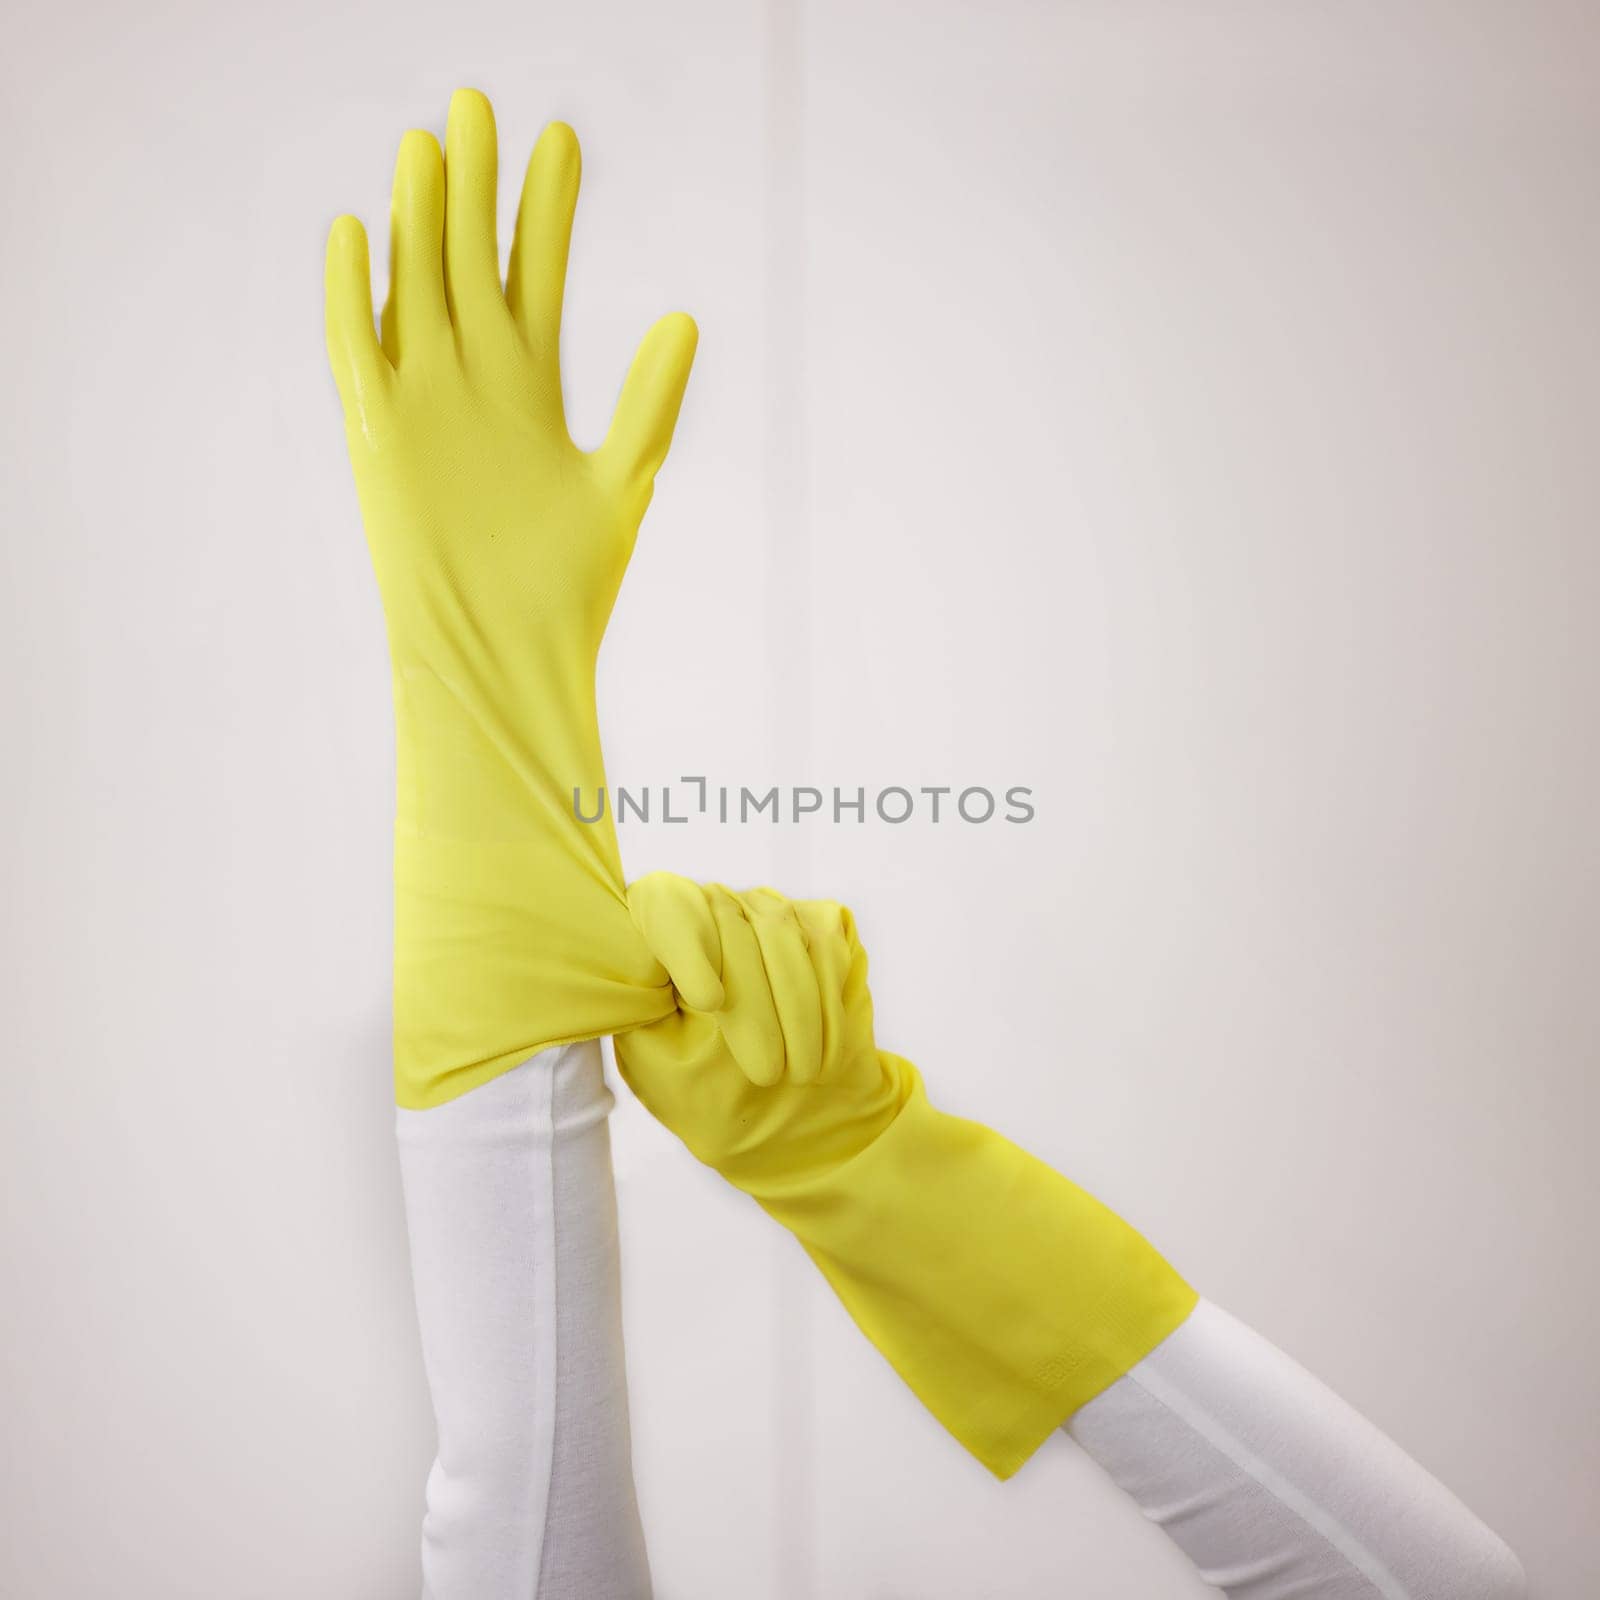 Cleaner, hands and gloves with cleaning and hygiene, safety from bacteria and germs with household disinfection. Protection, sanitize and ready to clean, person with housekeeping and maintenance.